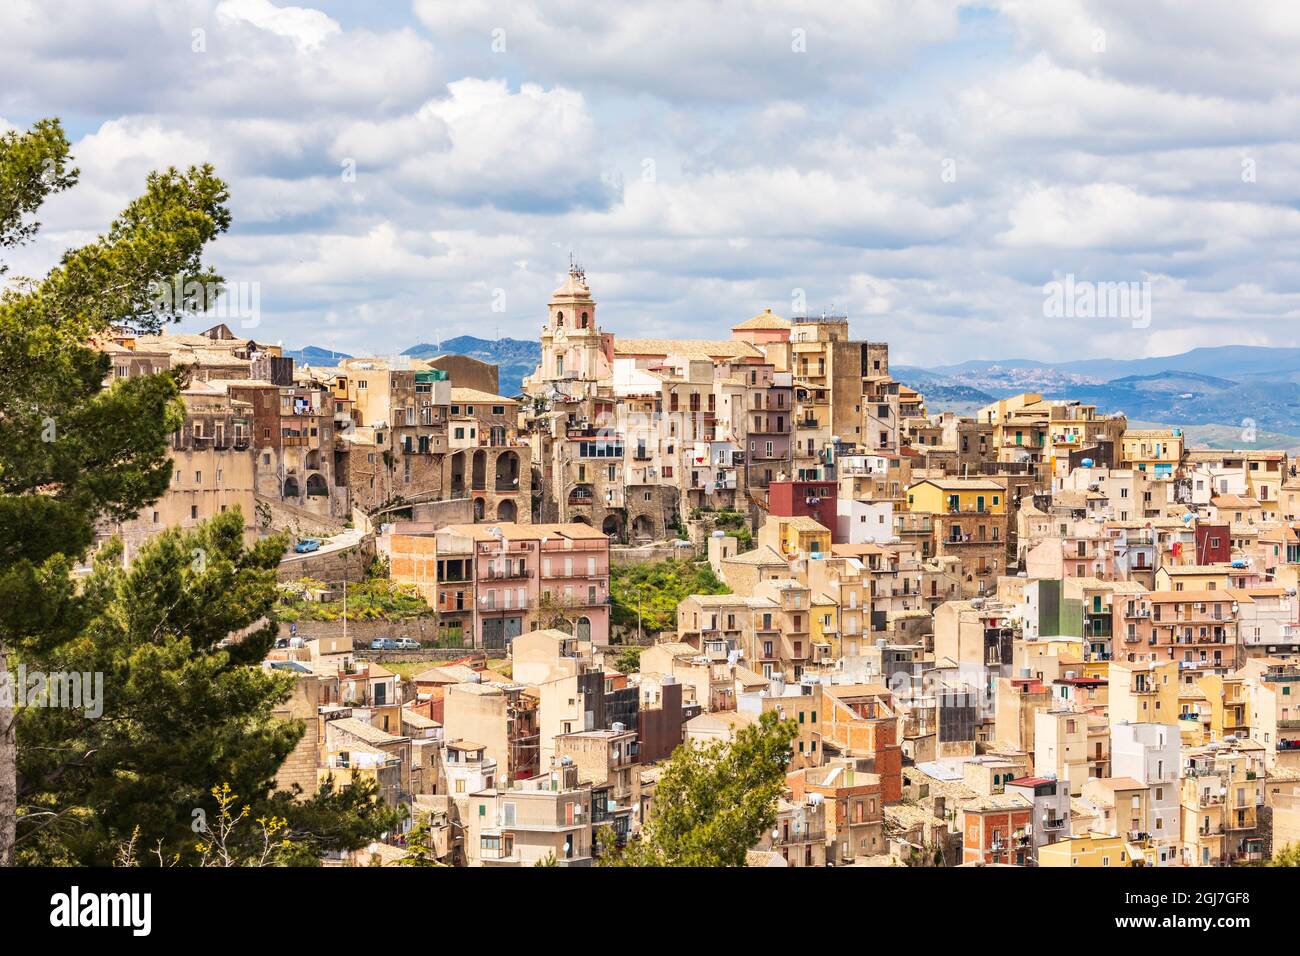 Italy, Sicily, Enna Province, Centuripe. The ancient town of Centuripe in eastern Sicily. The town is pre-Roman, dating back to the 5th century BC. Stock Photo